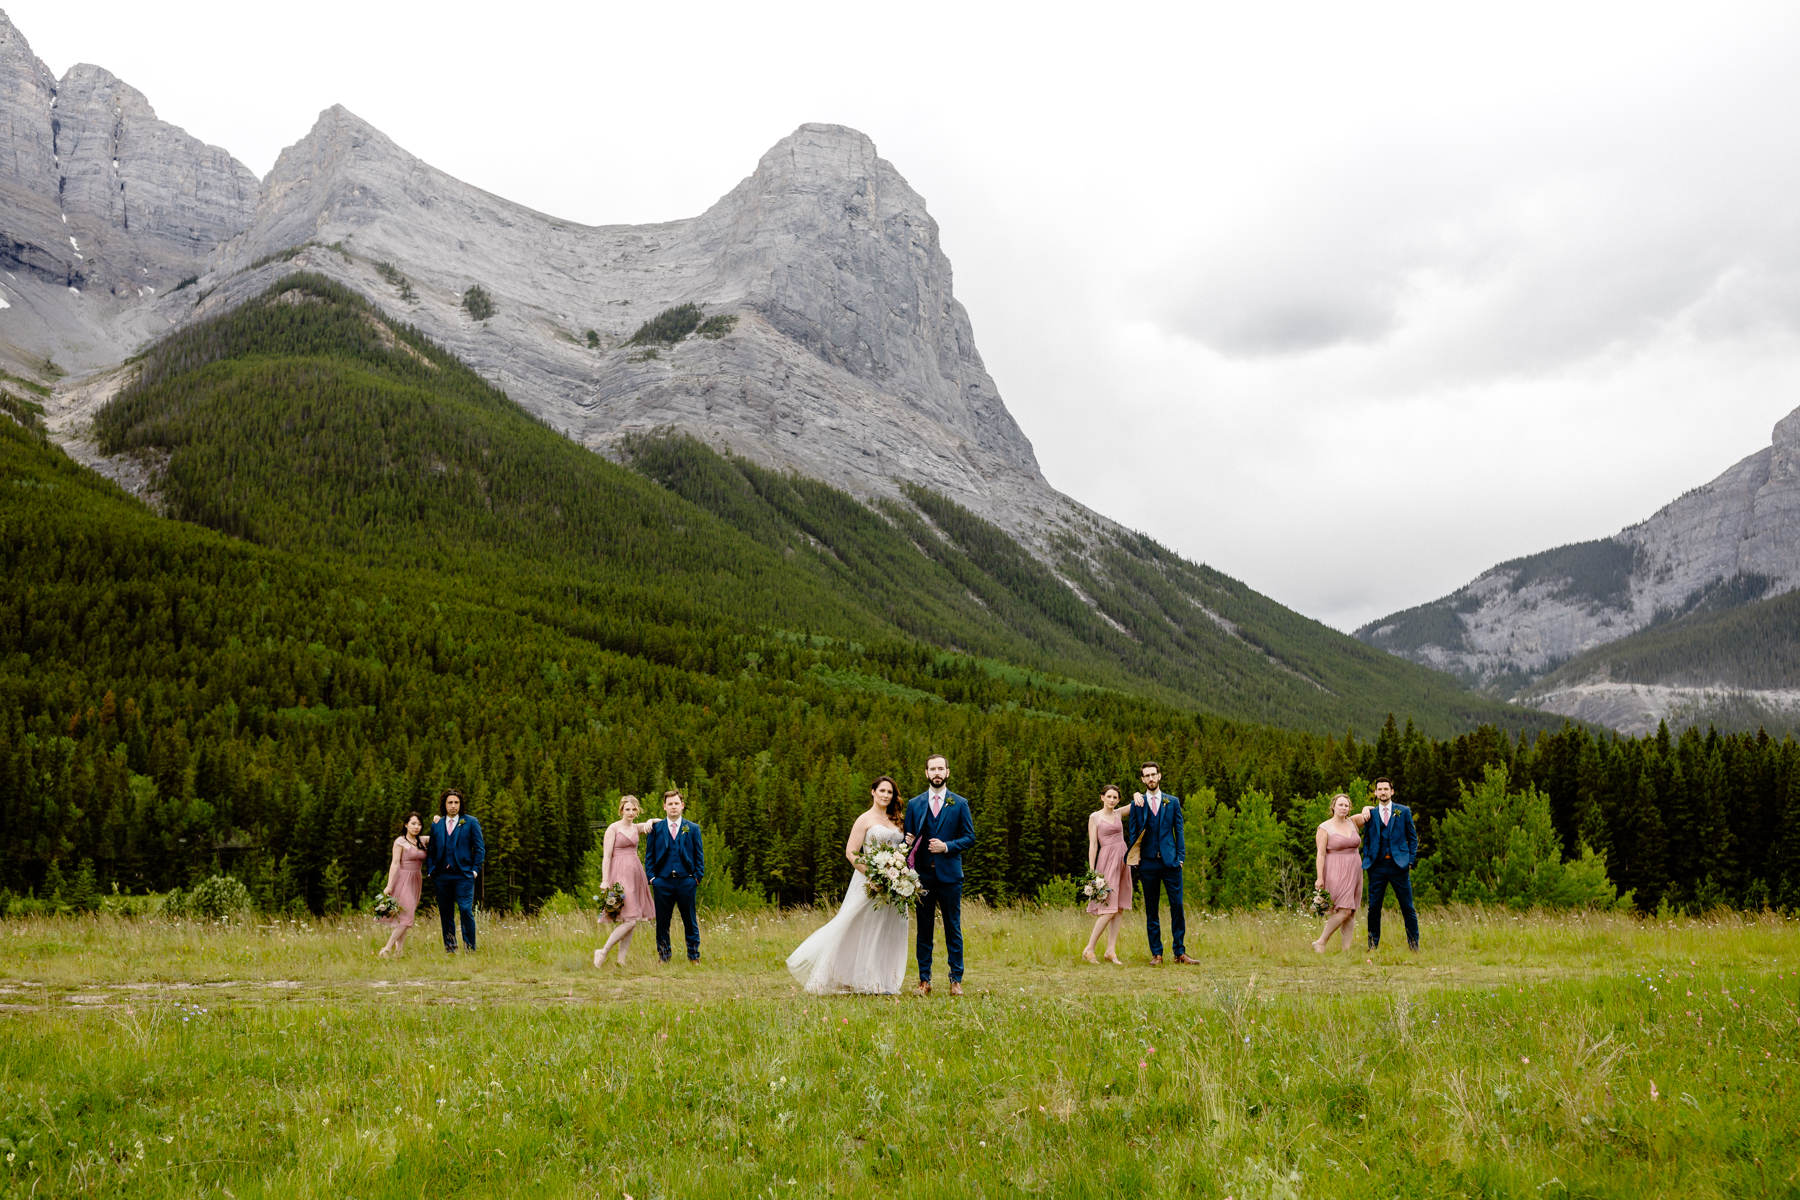 Canmore photographers at a Murrieta’s Wedding - Photo 31